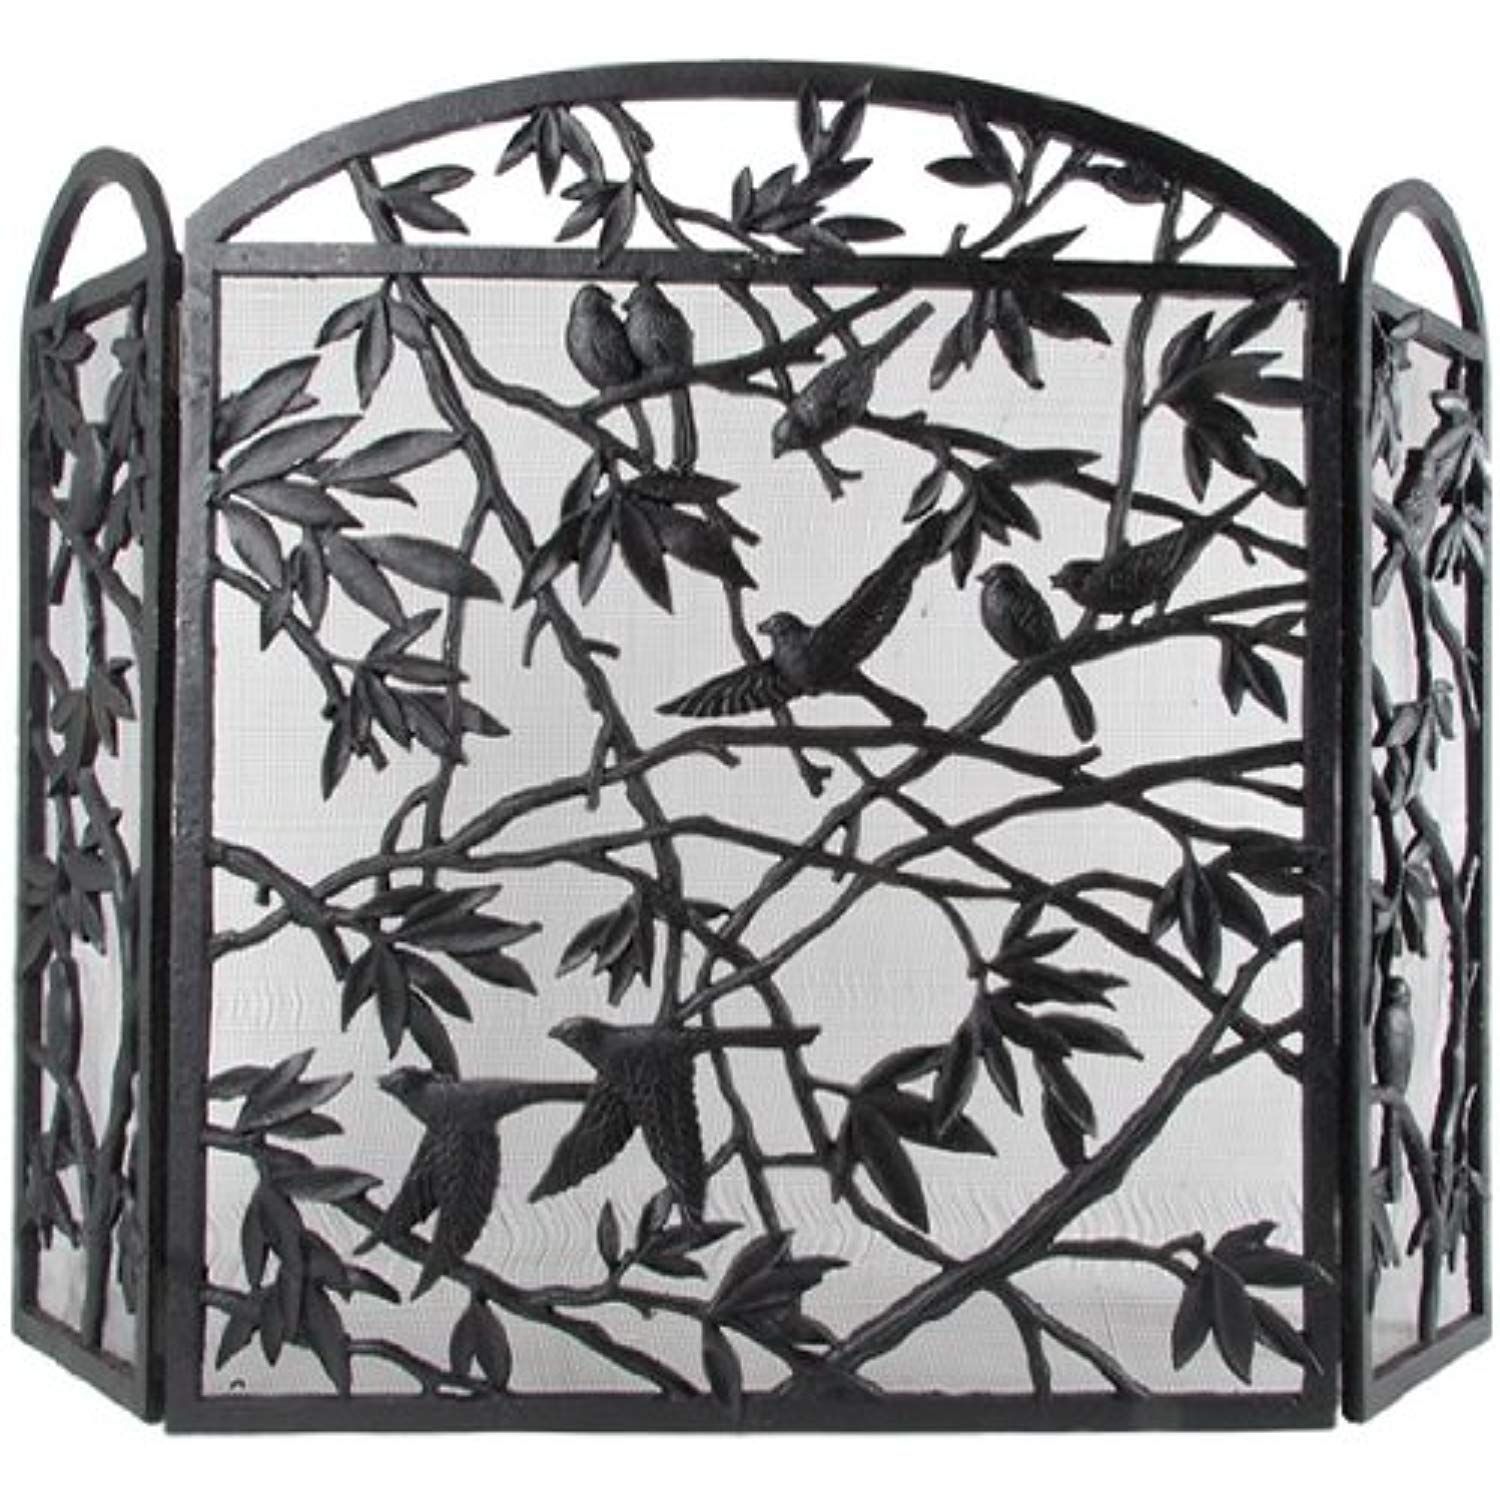 Pier One Fireplace Screen Beautiful Nach Fireplace Screen Bird Design Check Out the Image by